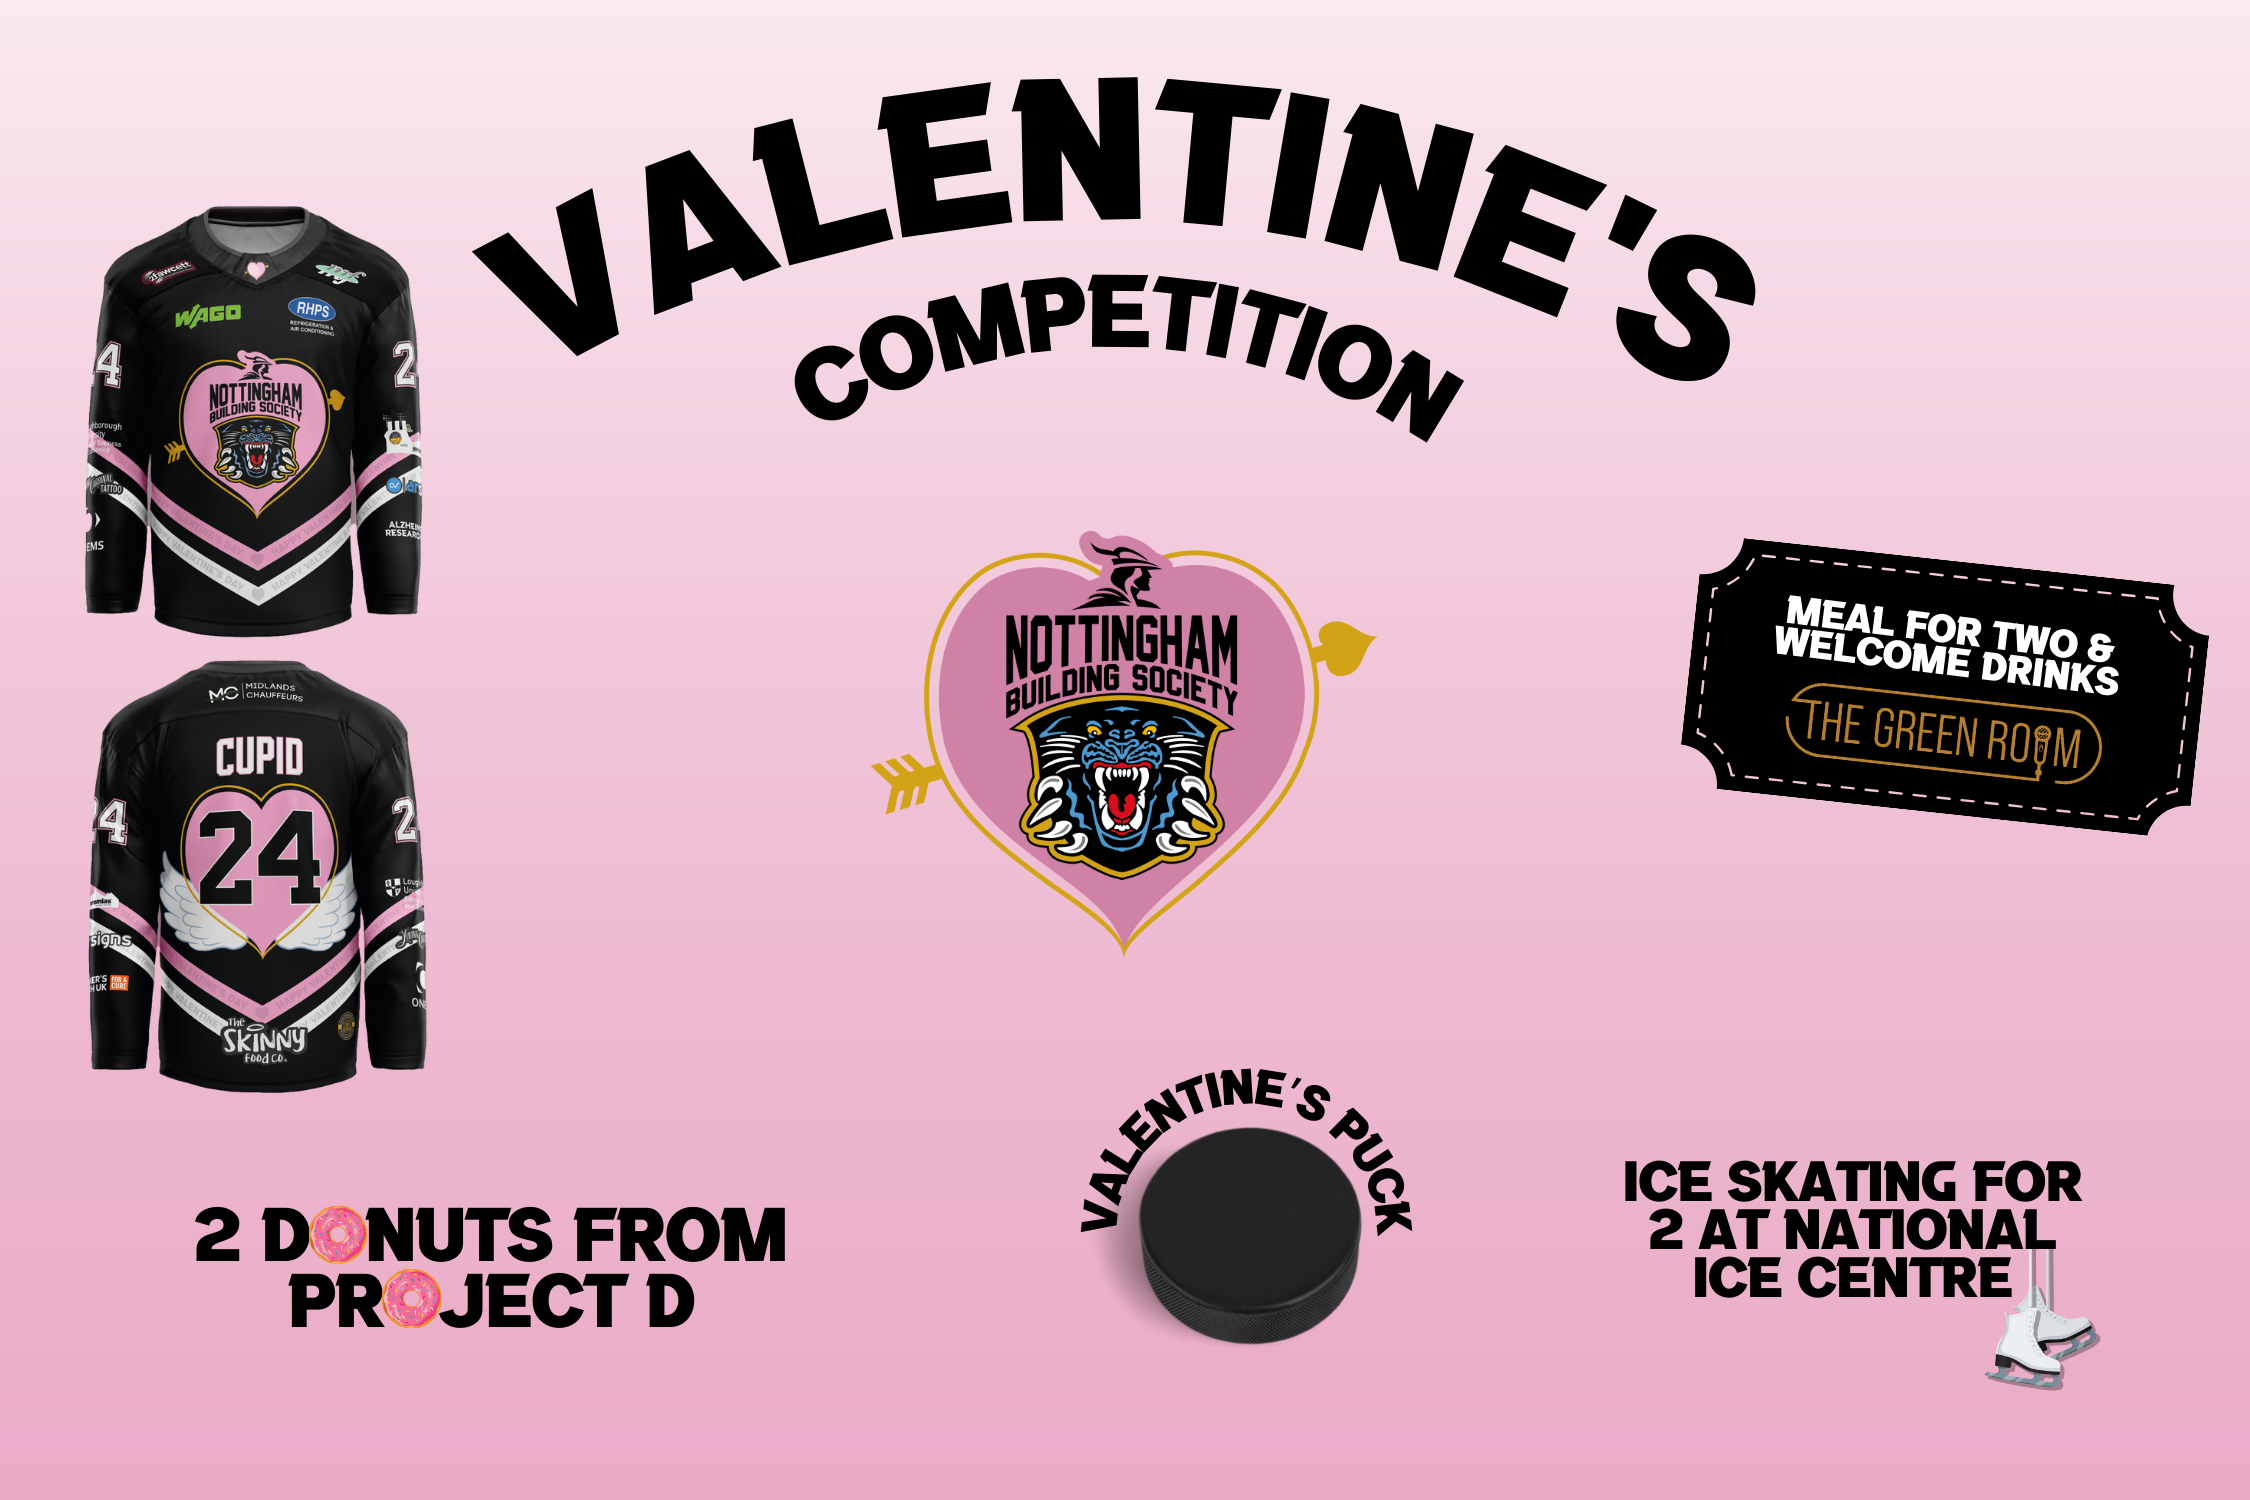 CONGRATULATIONS TO VALENTINE'S COMPETITION WINNERS